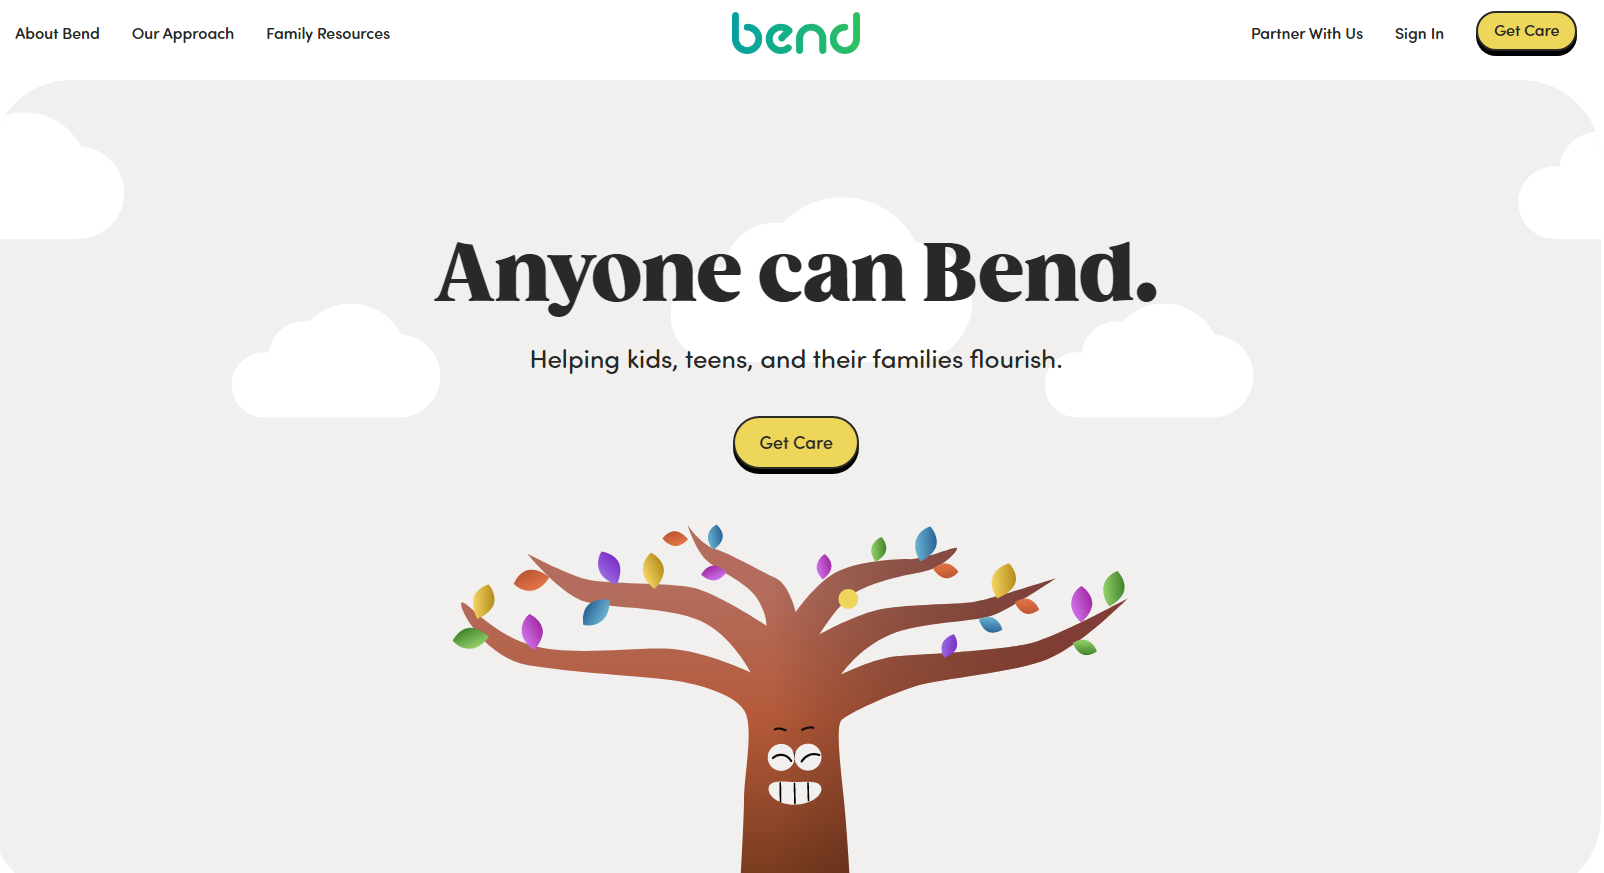 Bend Health Raises $32M in Funding Round Led by SteelSky Ventures, Maveron LLC, and WVV Capital.